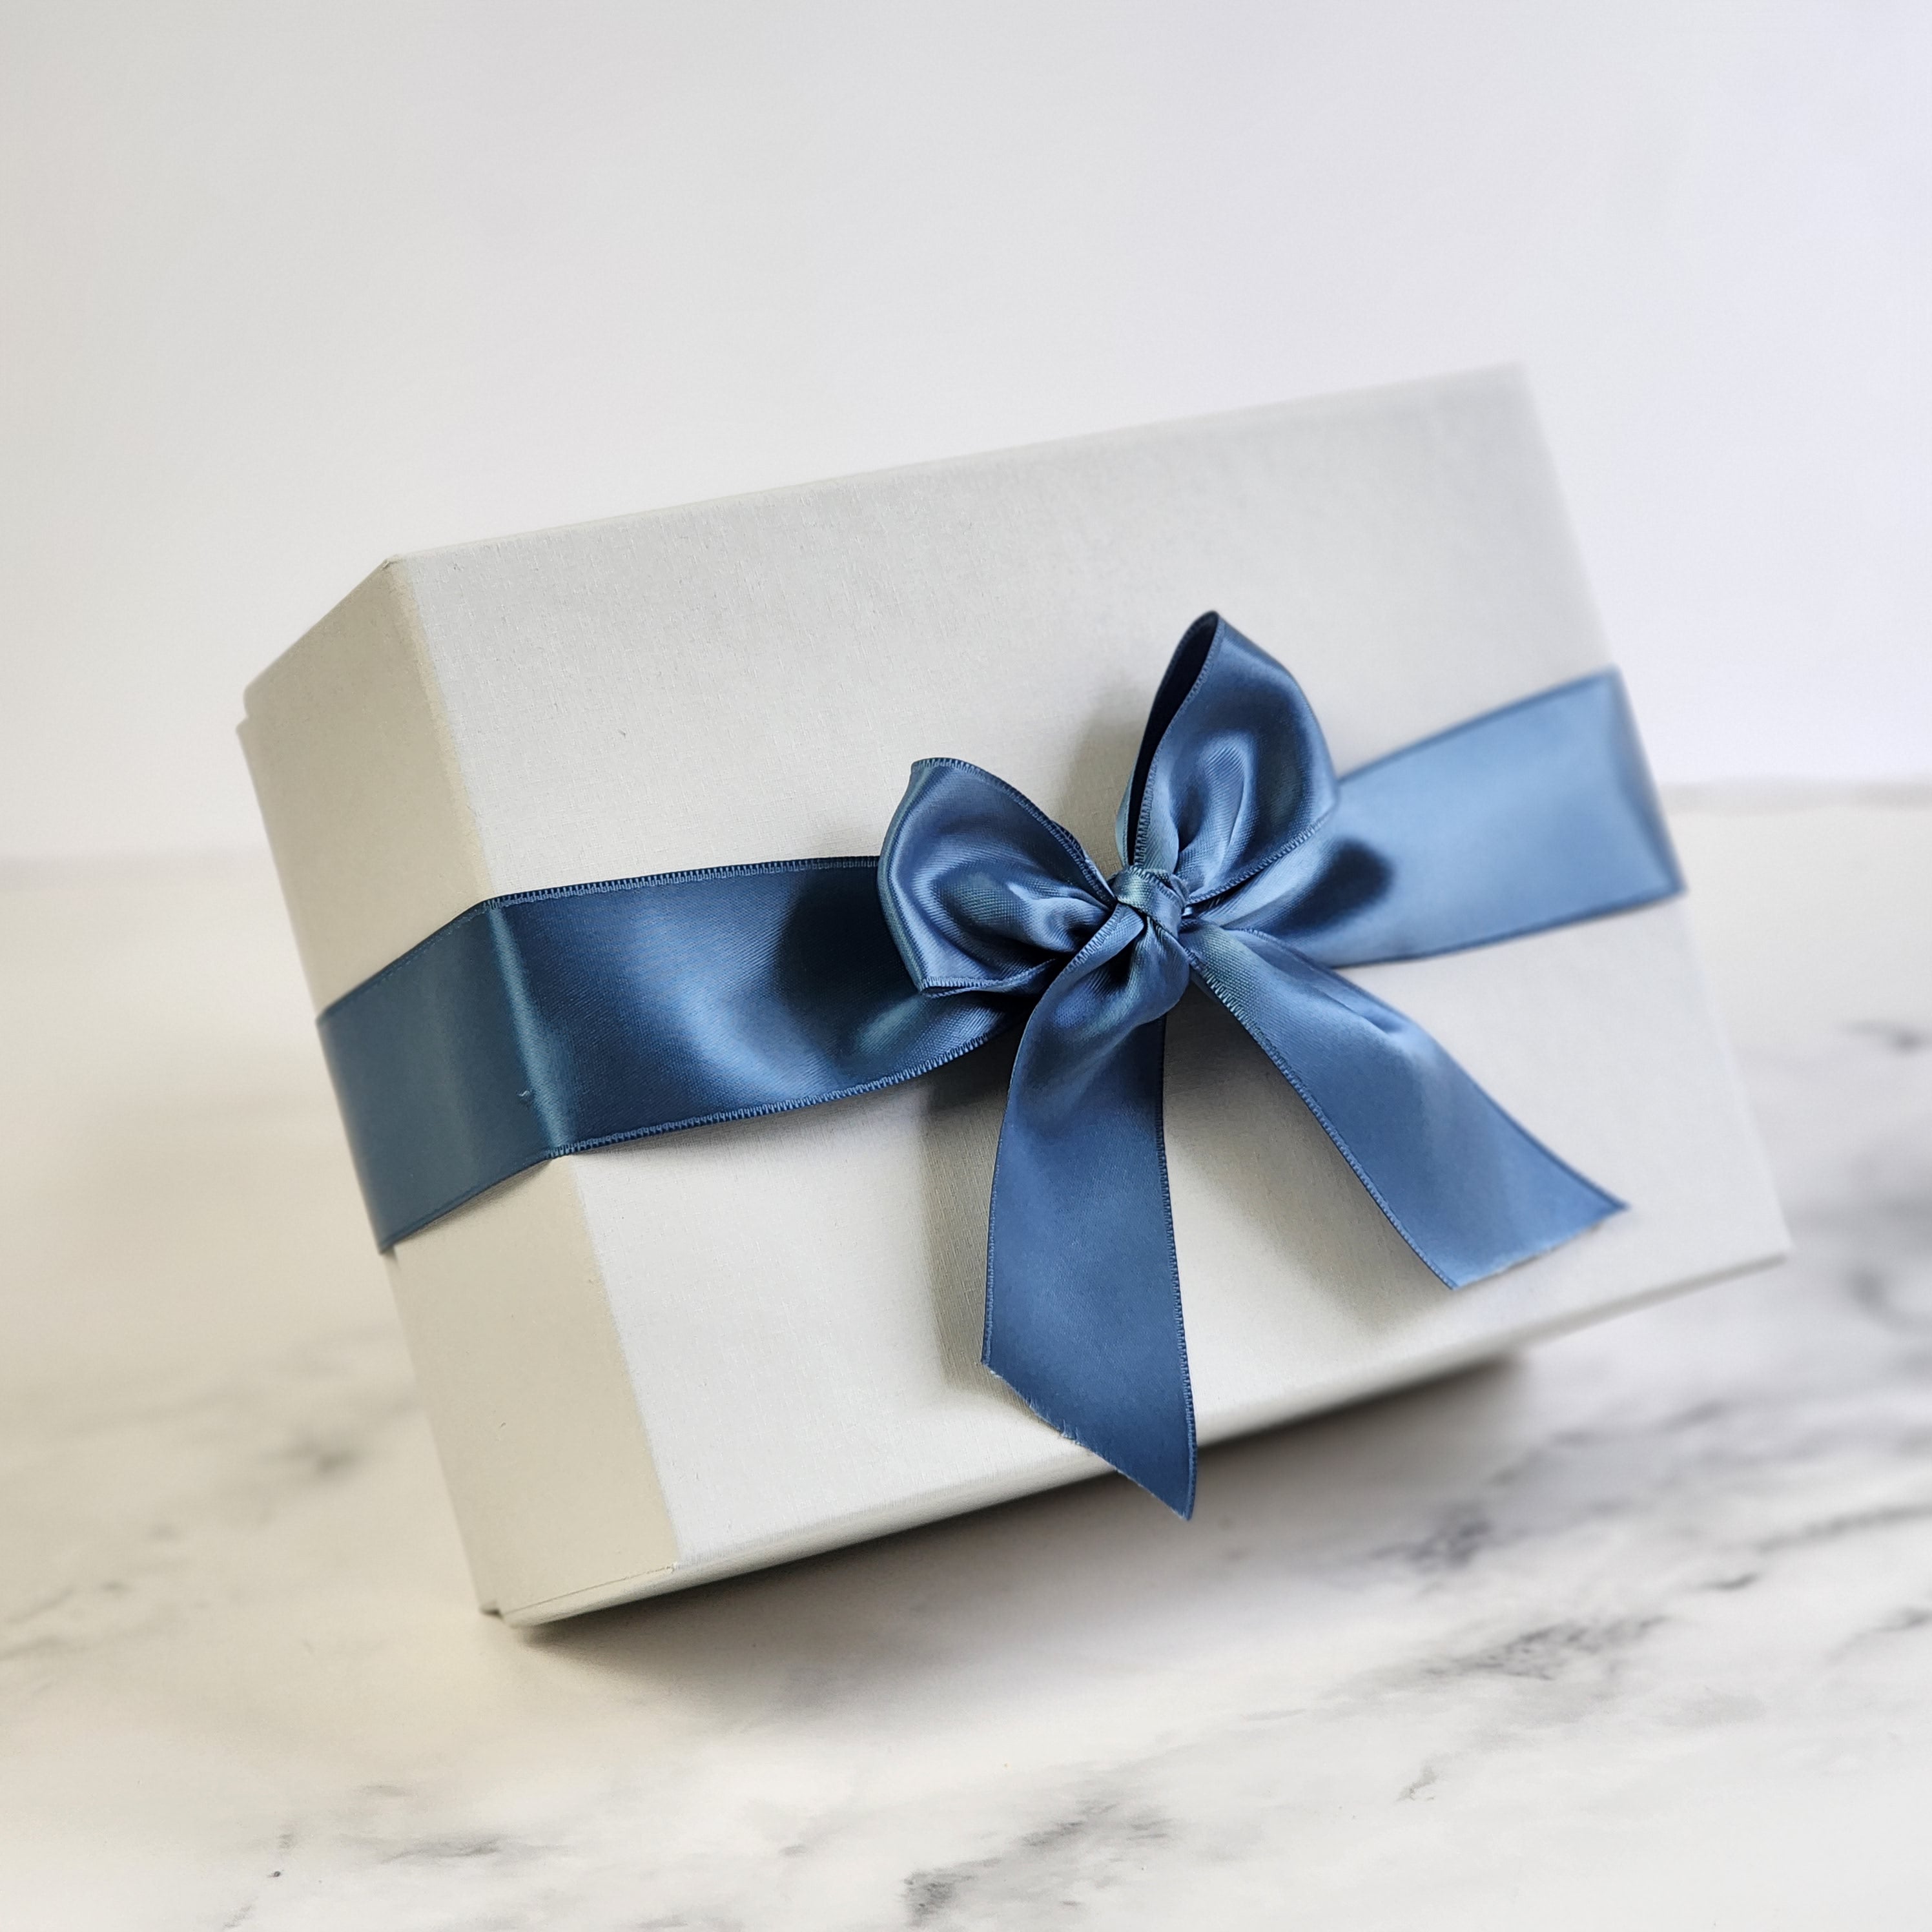 Enagement & Bridal Shower Gifts  Customized Gift Boxes - Foxblossom Co.